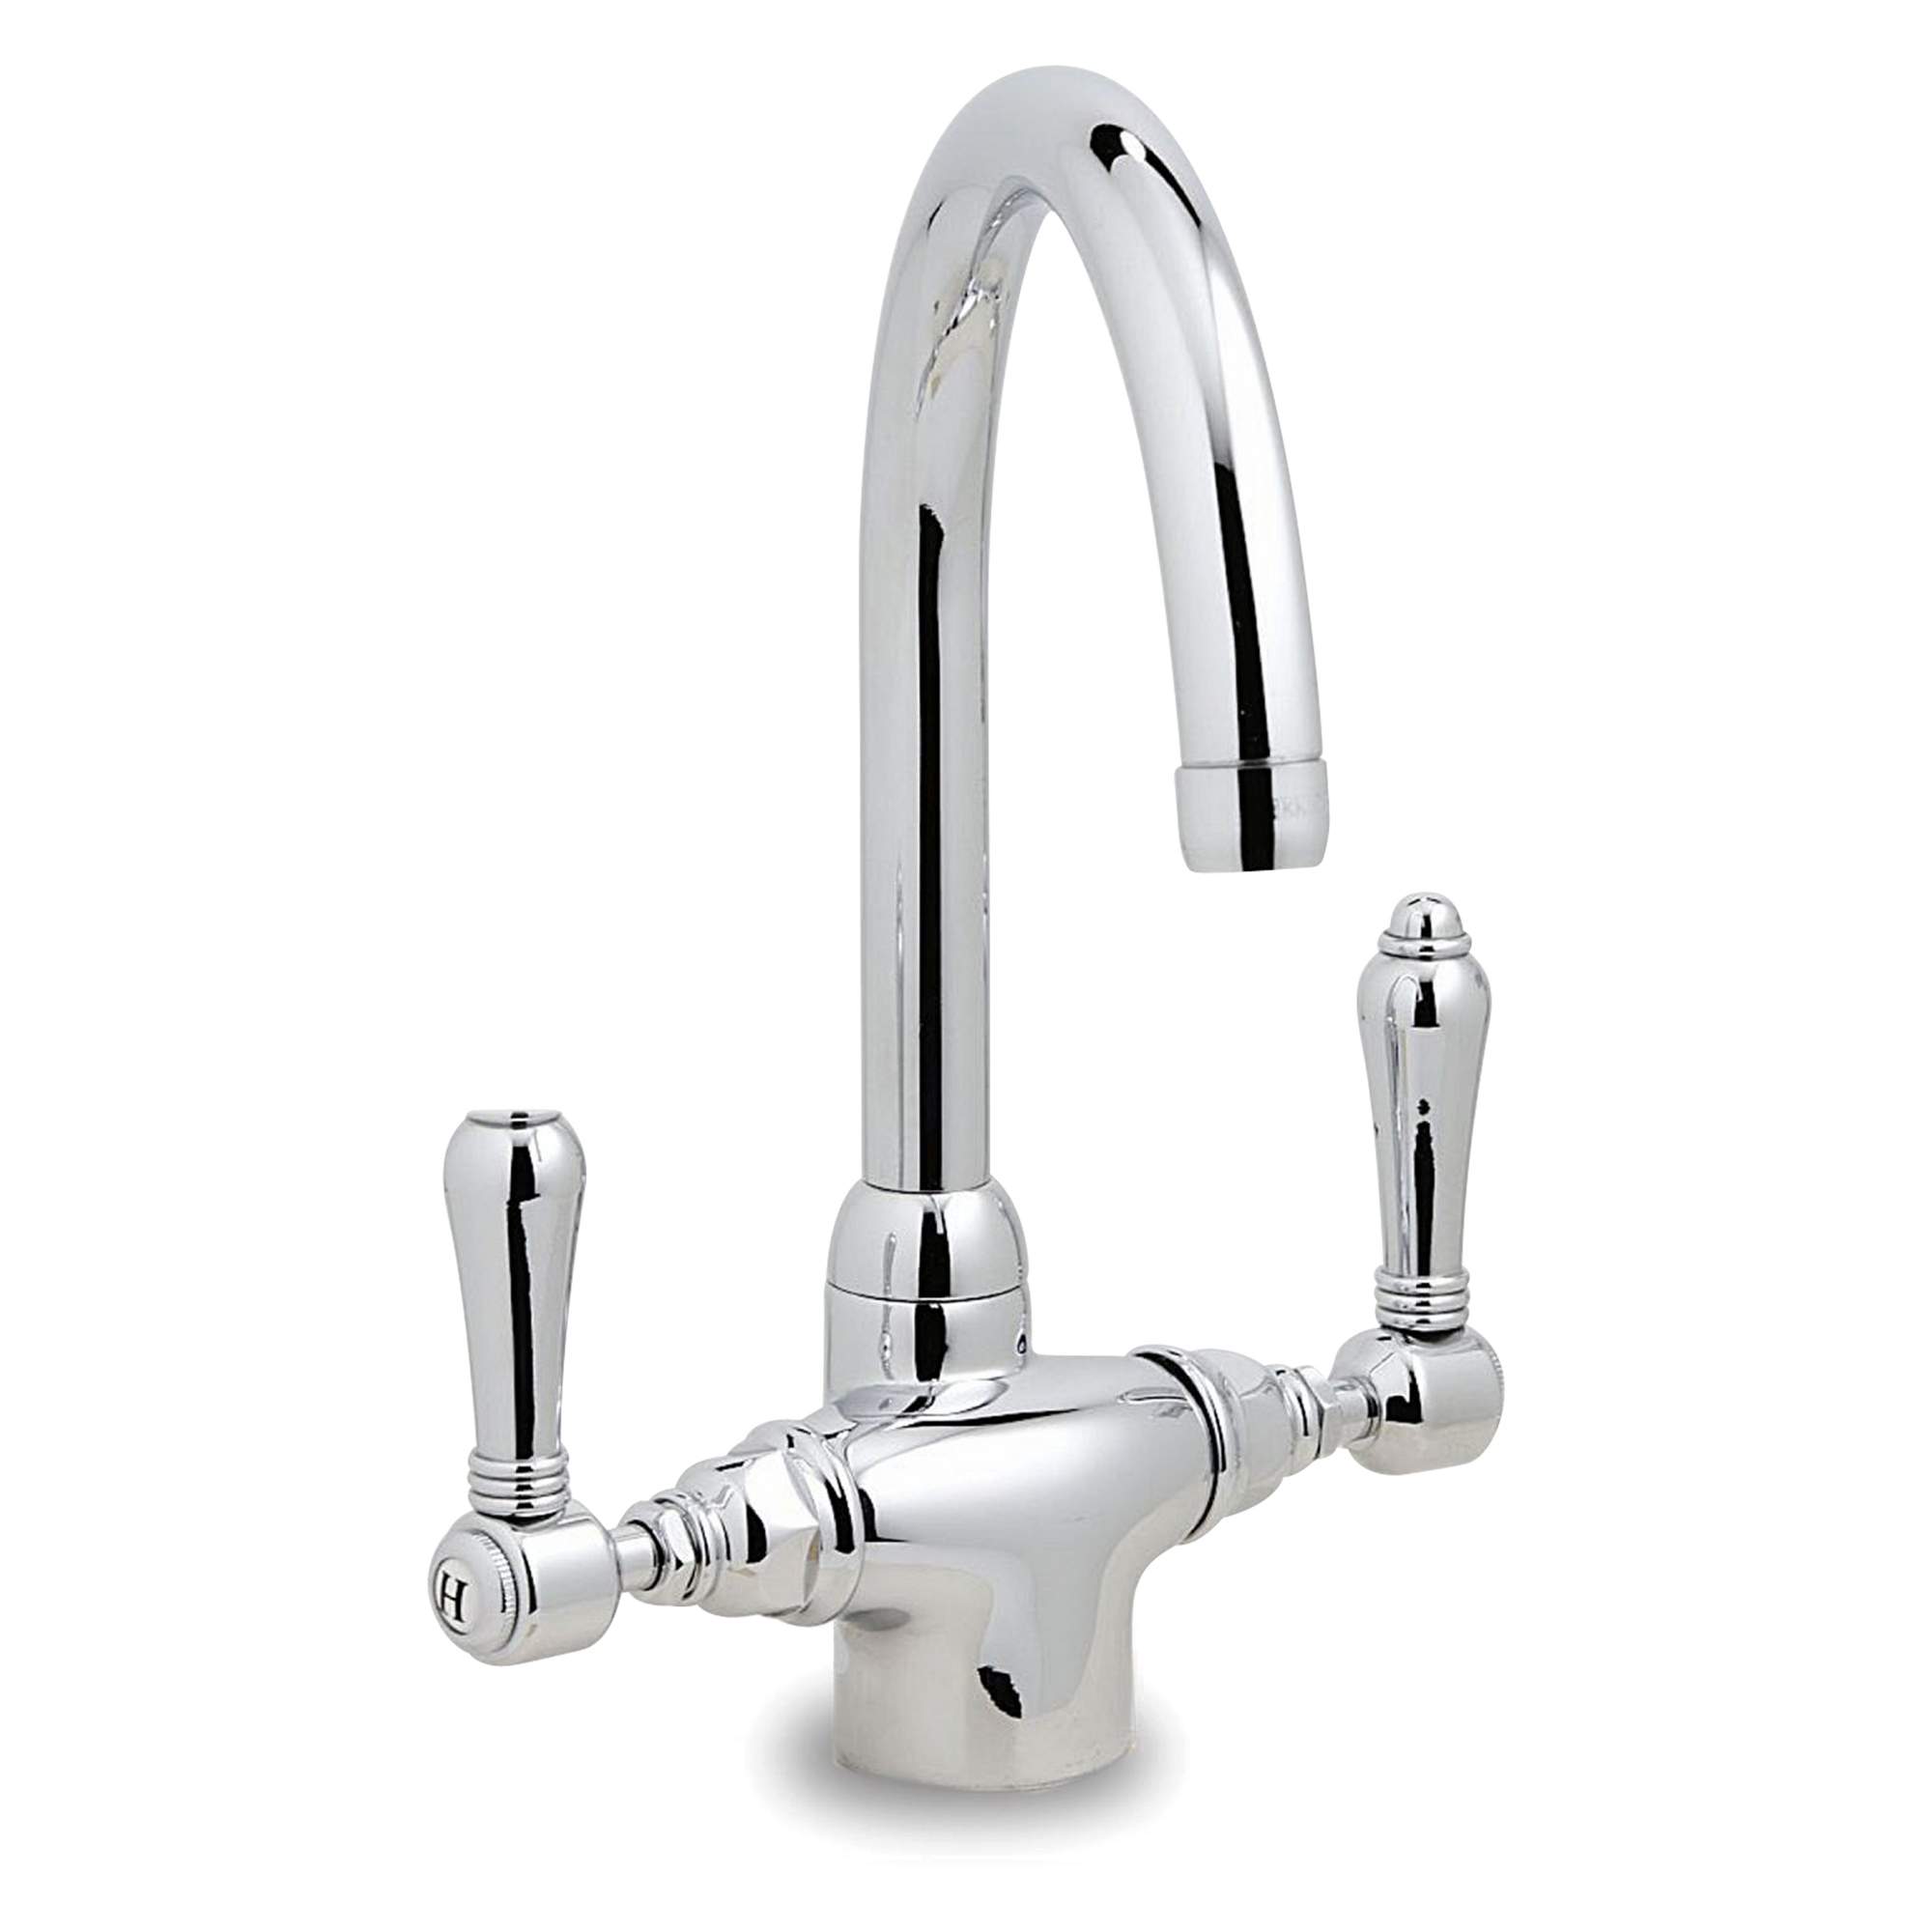 A seamless, single hole classic faucet with metal hot and cold lever handles and a gooseneck spout.